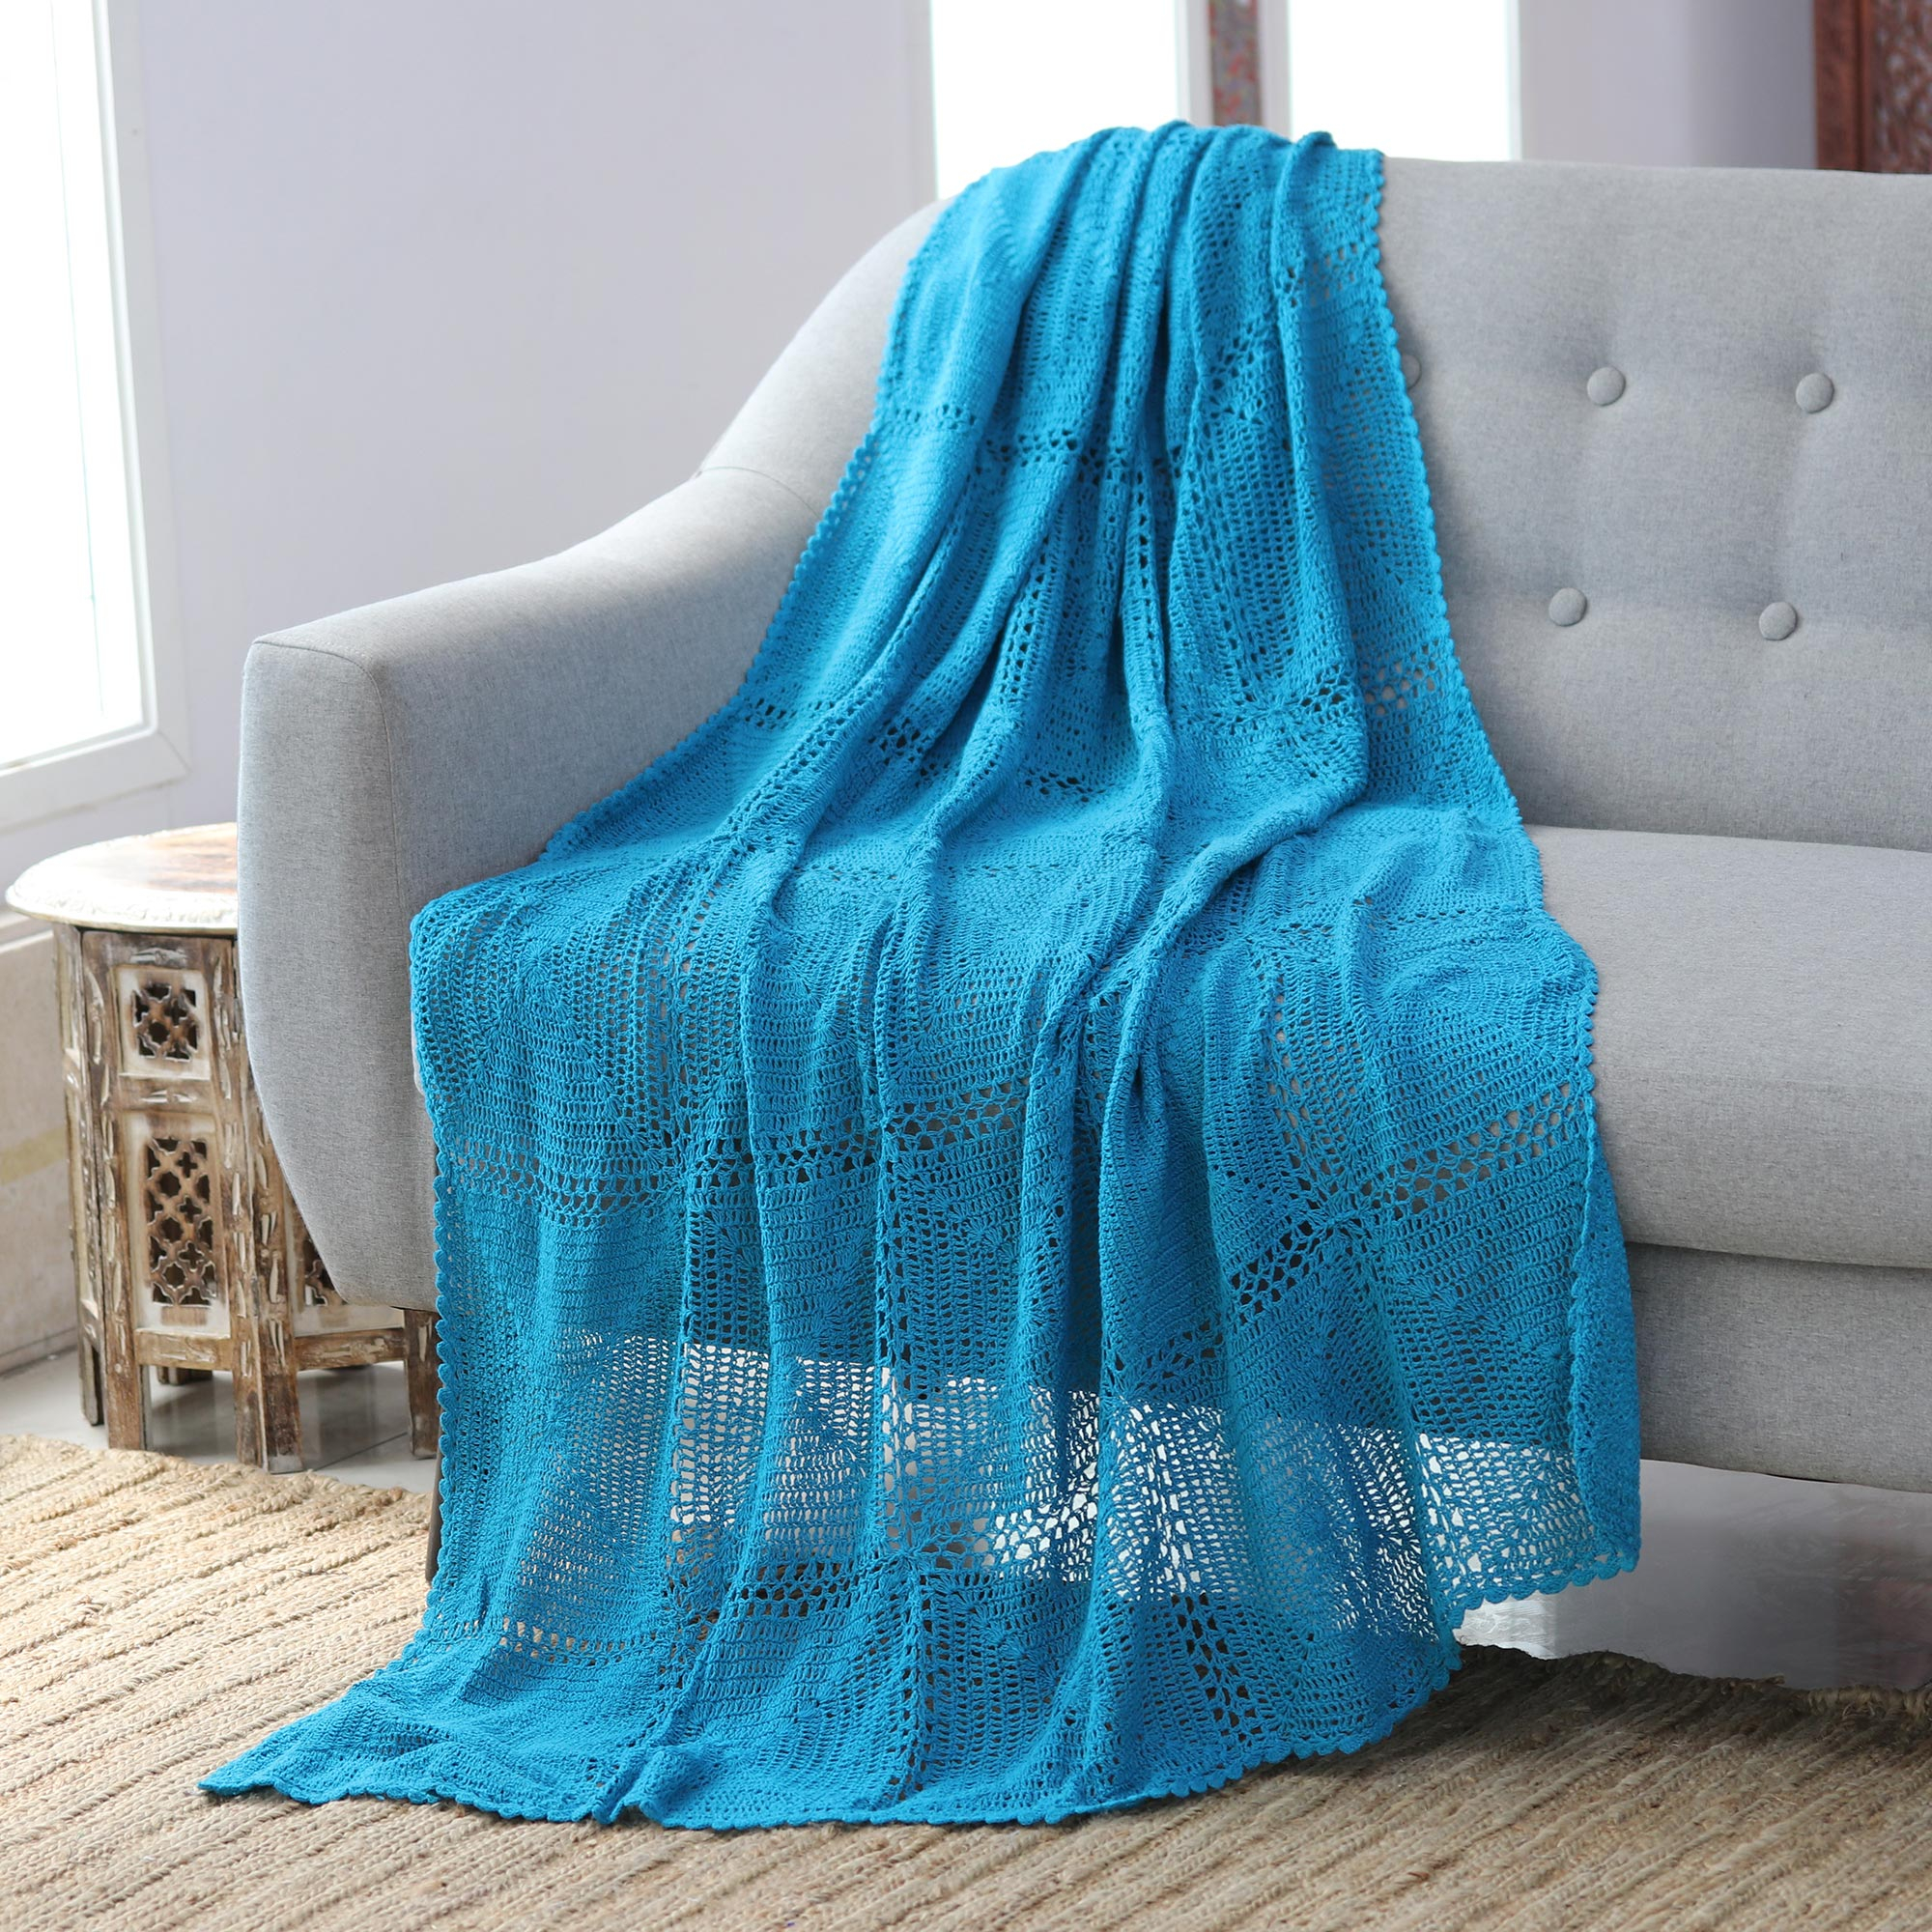 Crocheted Turquoise Cotton Throw Blanket from India - Comfort Muse in ...